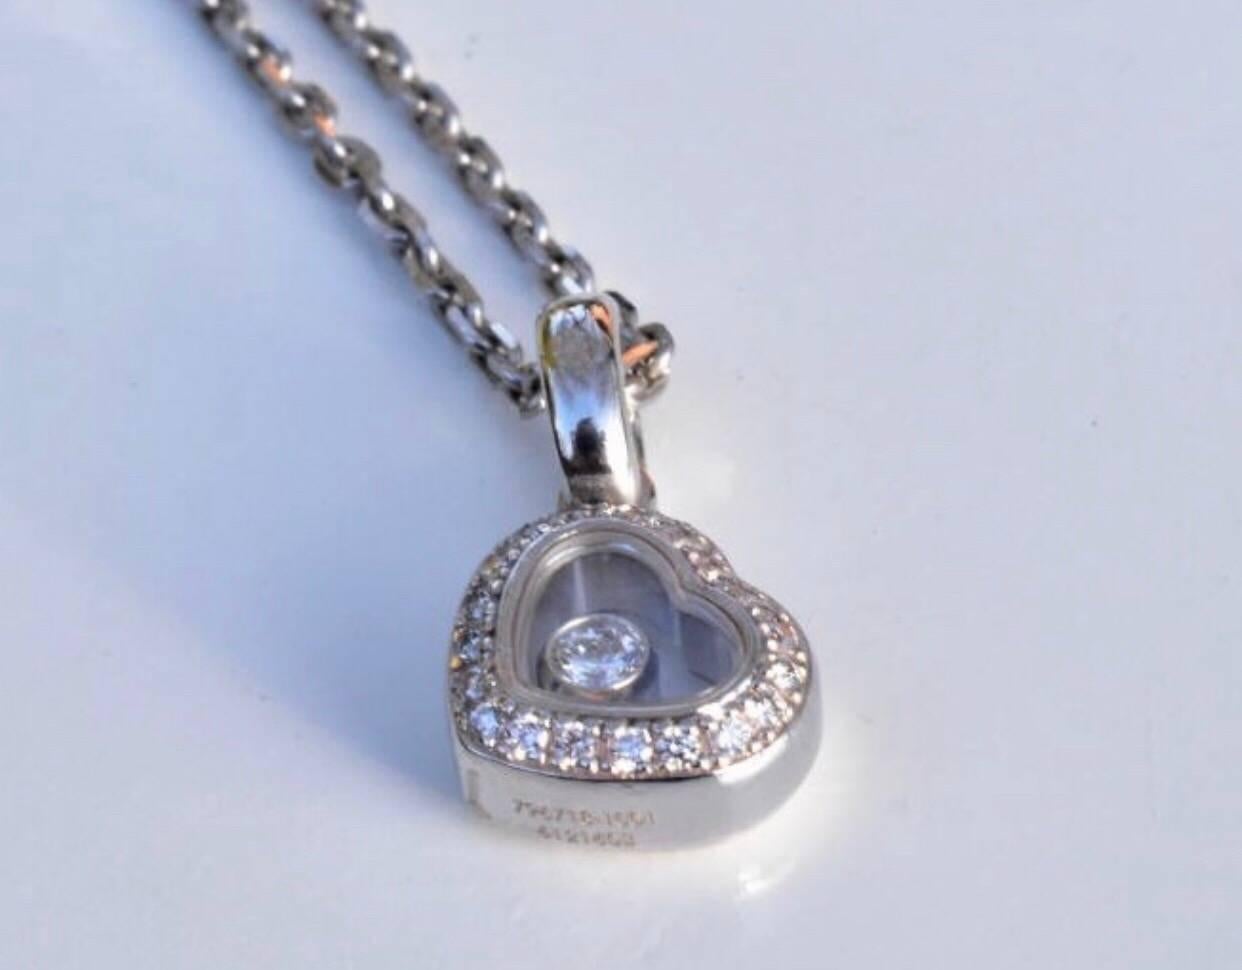 A Chopard Happy Diamonds ring and necklace set in18K white gold. Both items features a heart with a surround of diamonds with one free moving diamond under a sapphire glass.
Hallmarked: Chopard 82 / 6718-6097114 and 796718-1001-6121603
Ring size: UK